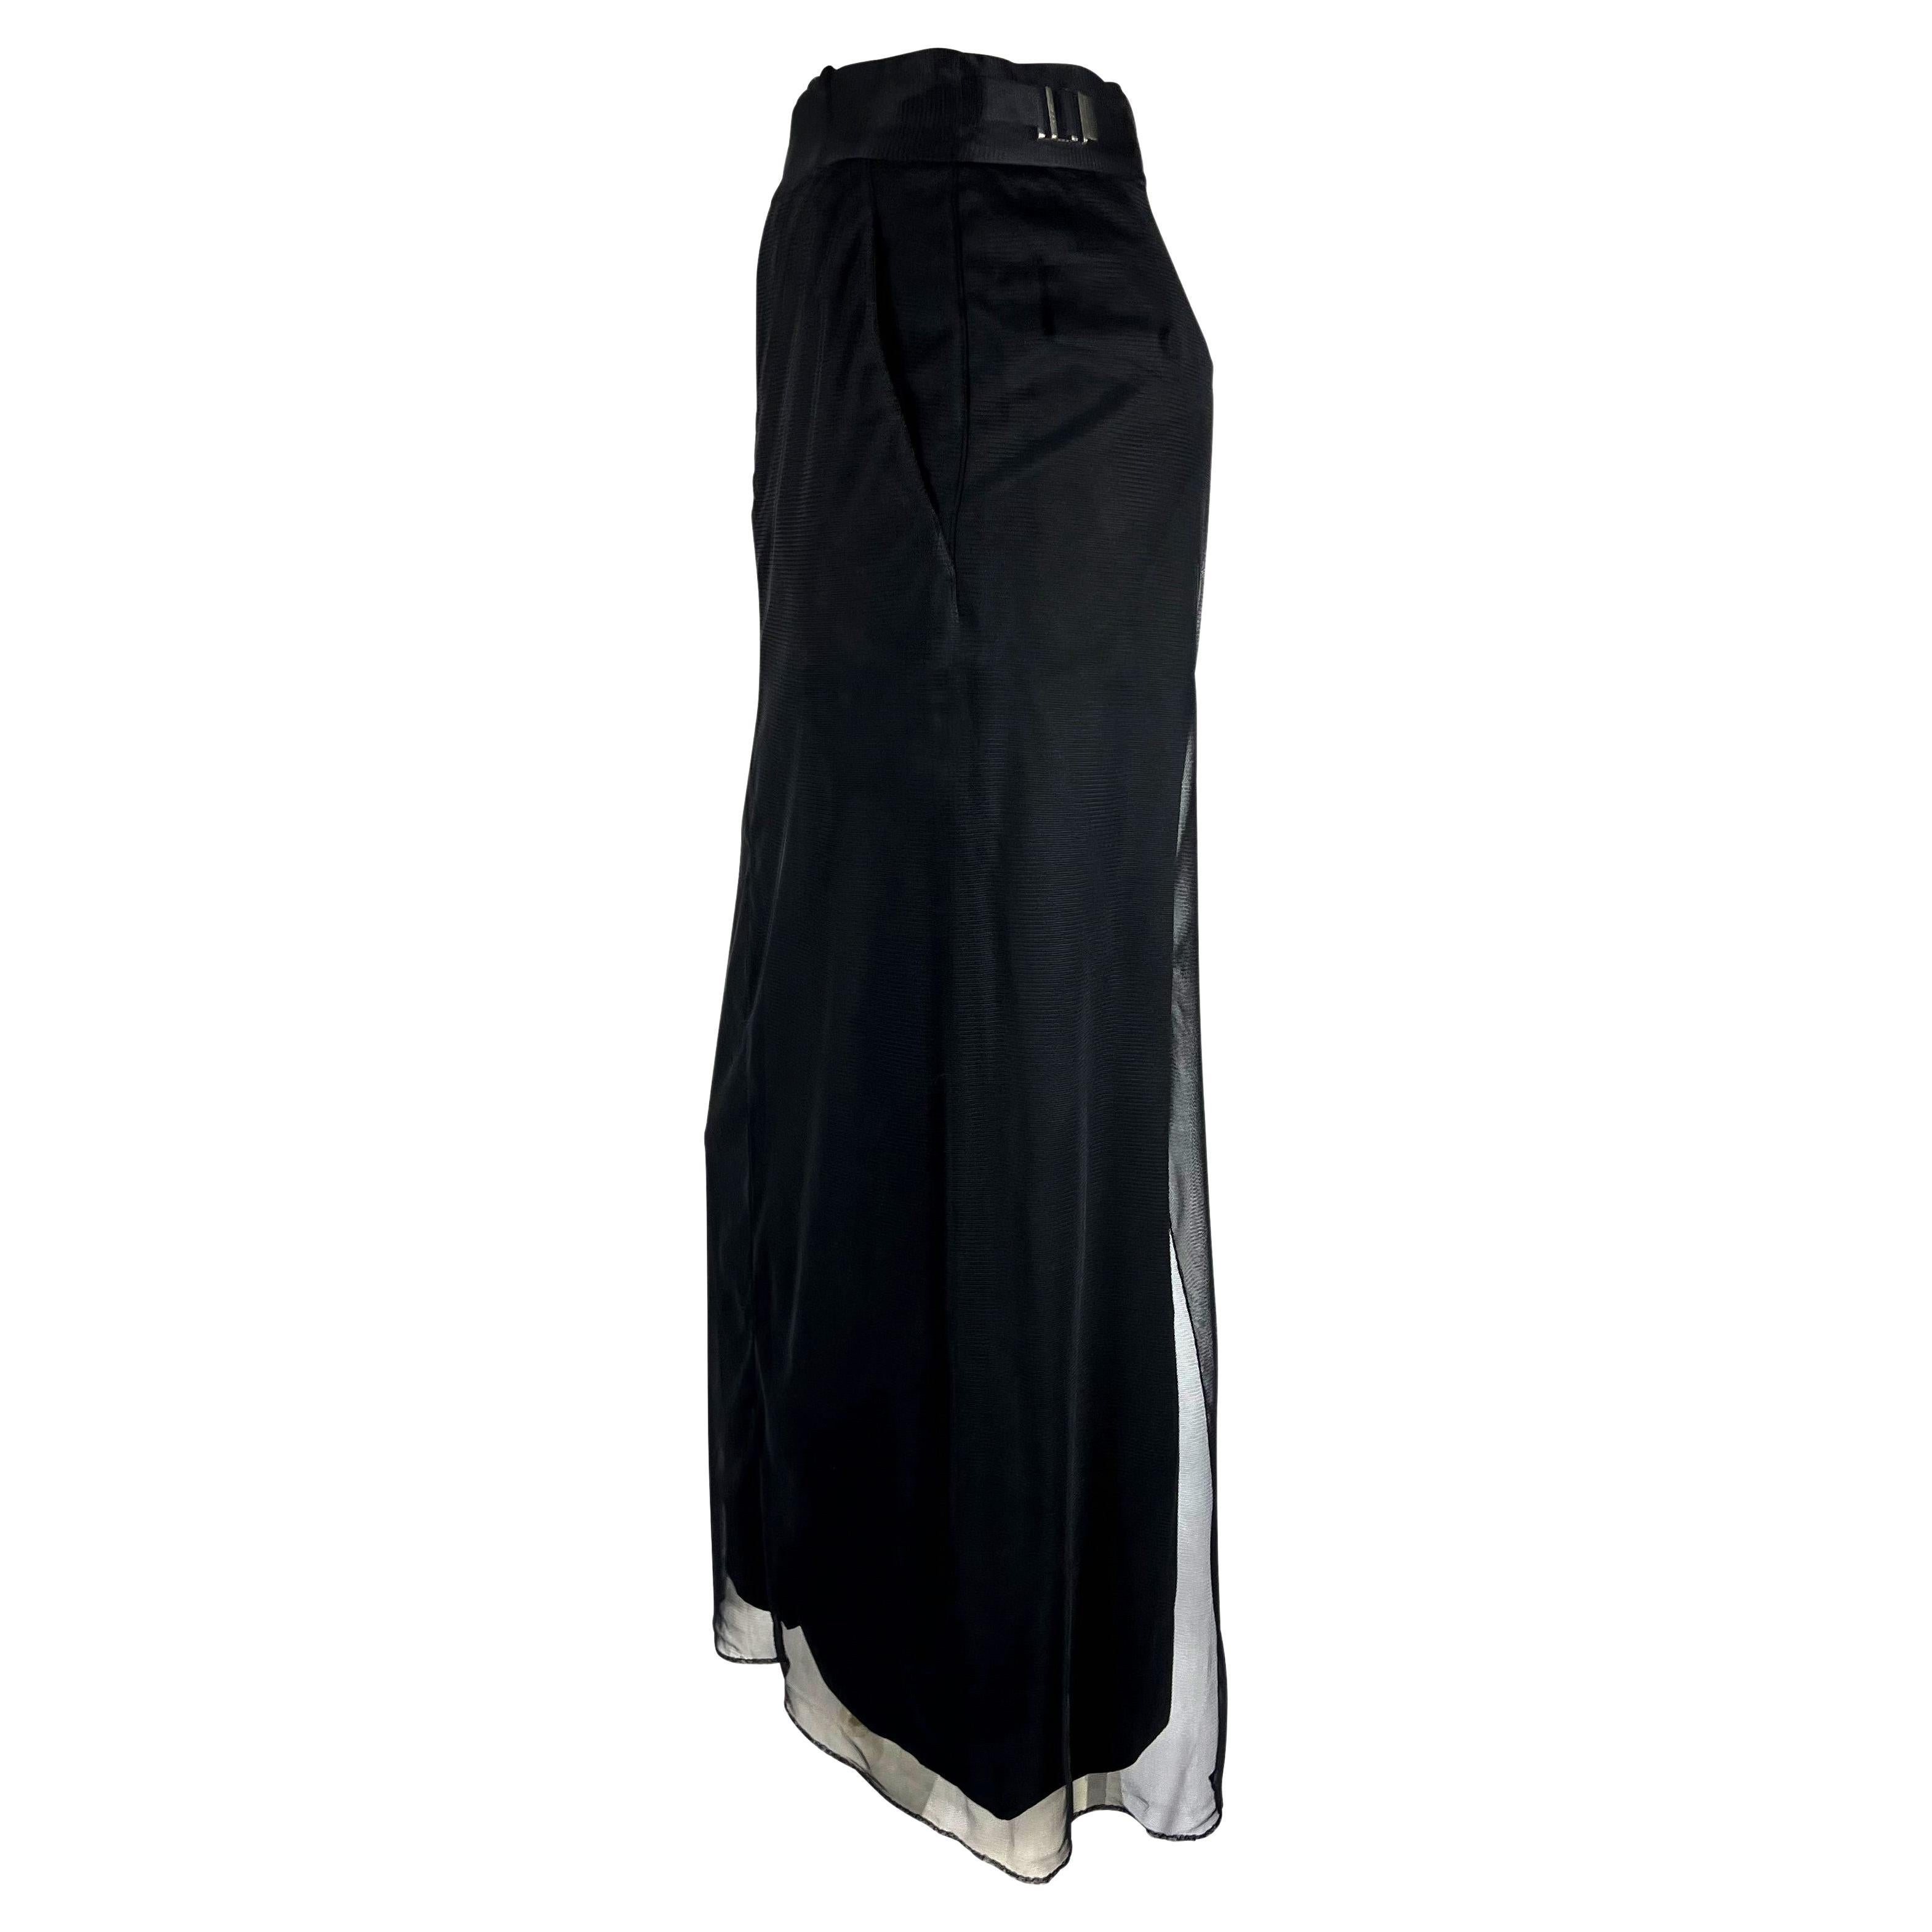 Women's F/W 1998 Gucci by Tom Ford Runway Black Tulle Overlay Tapered Maxi Skirt For Sale